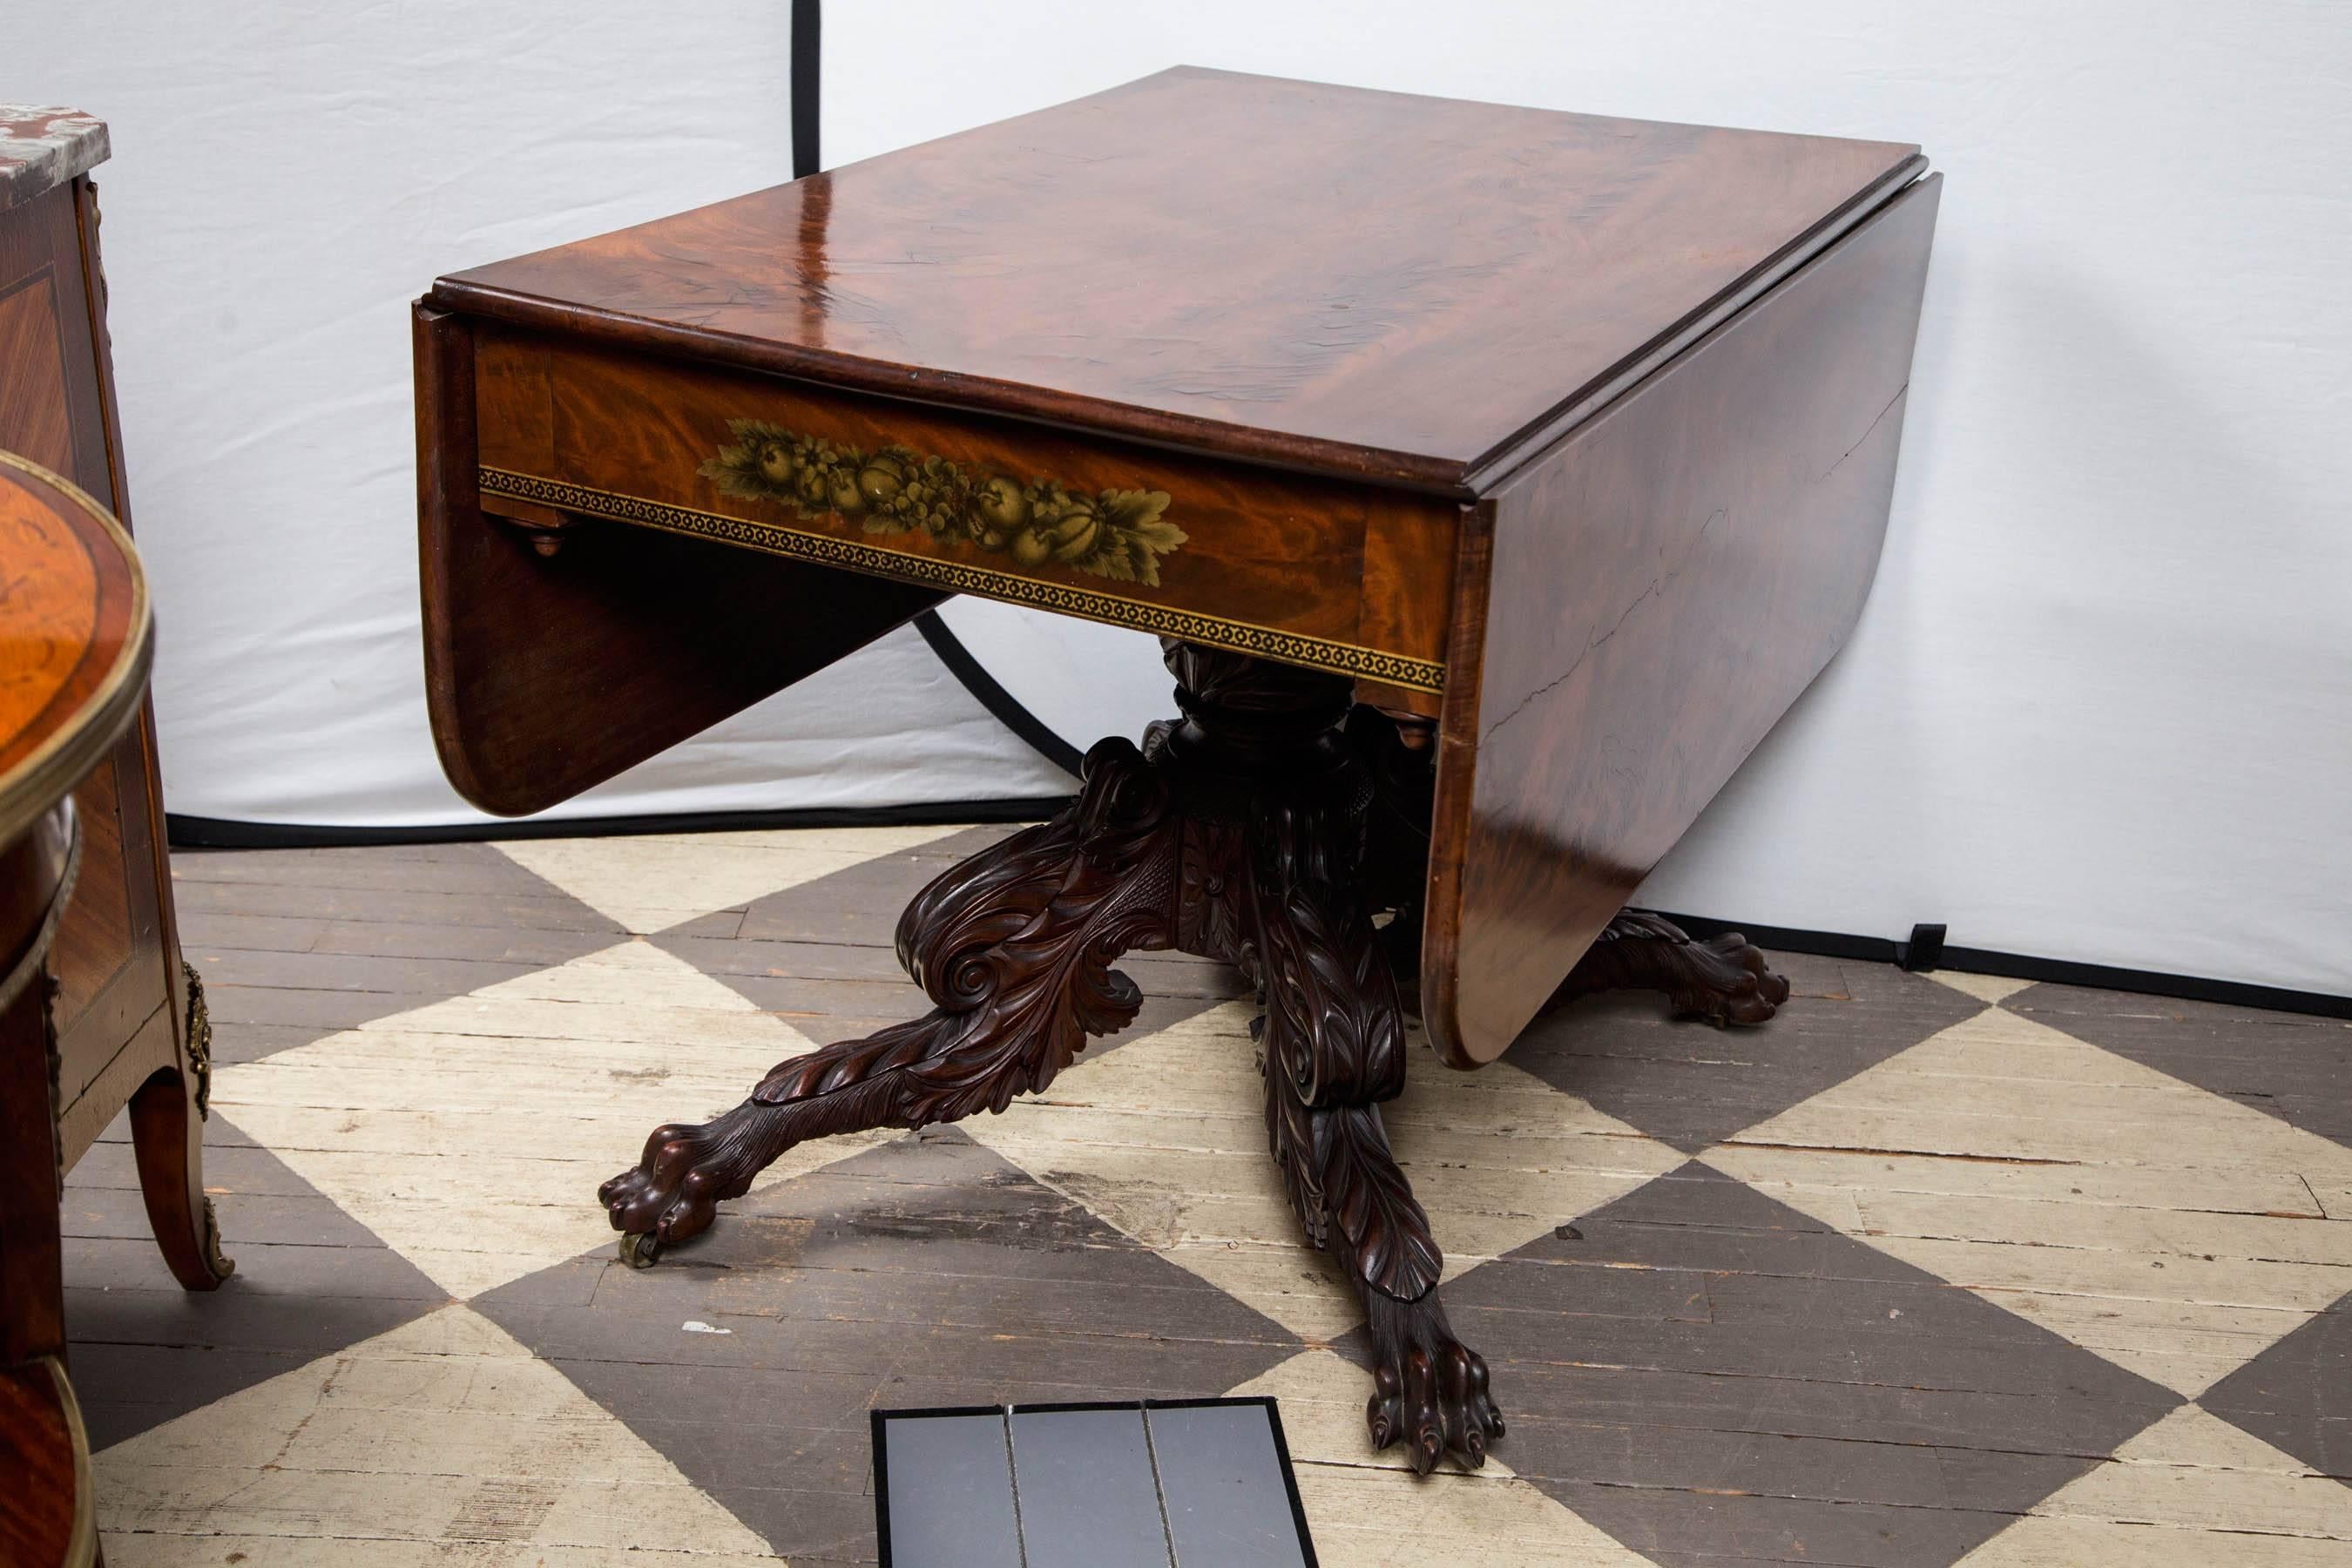 Flame mahogany single board top and drop leaves. Original stenciling of fruit and leaves with a classical band below. Crisply carved center pedestal with carved acanthus leaves and four legs with acanthus leaf and paw deep craving. Original